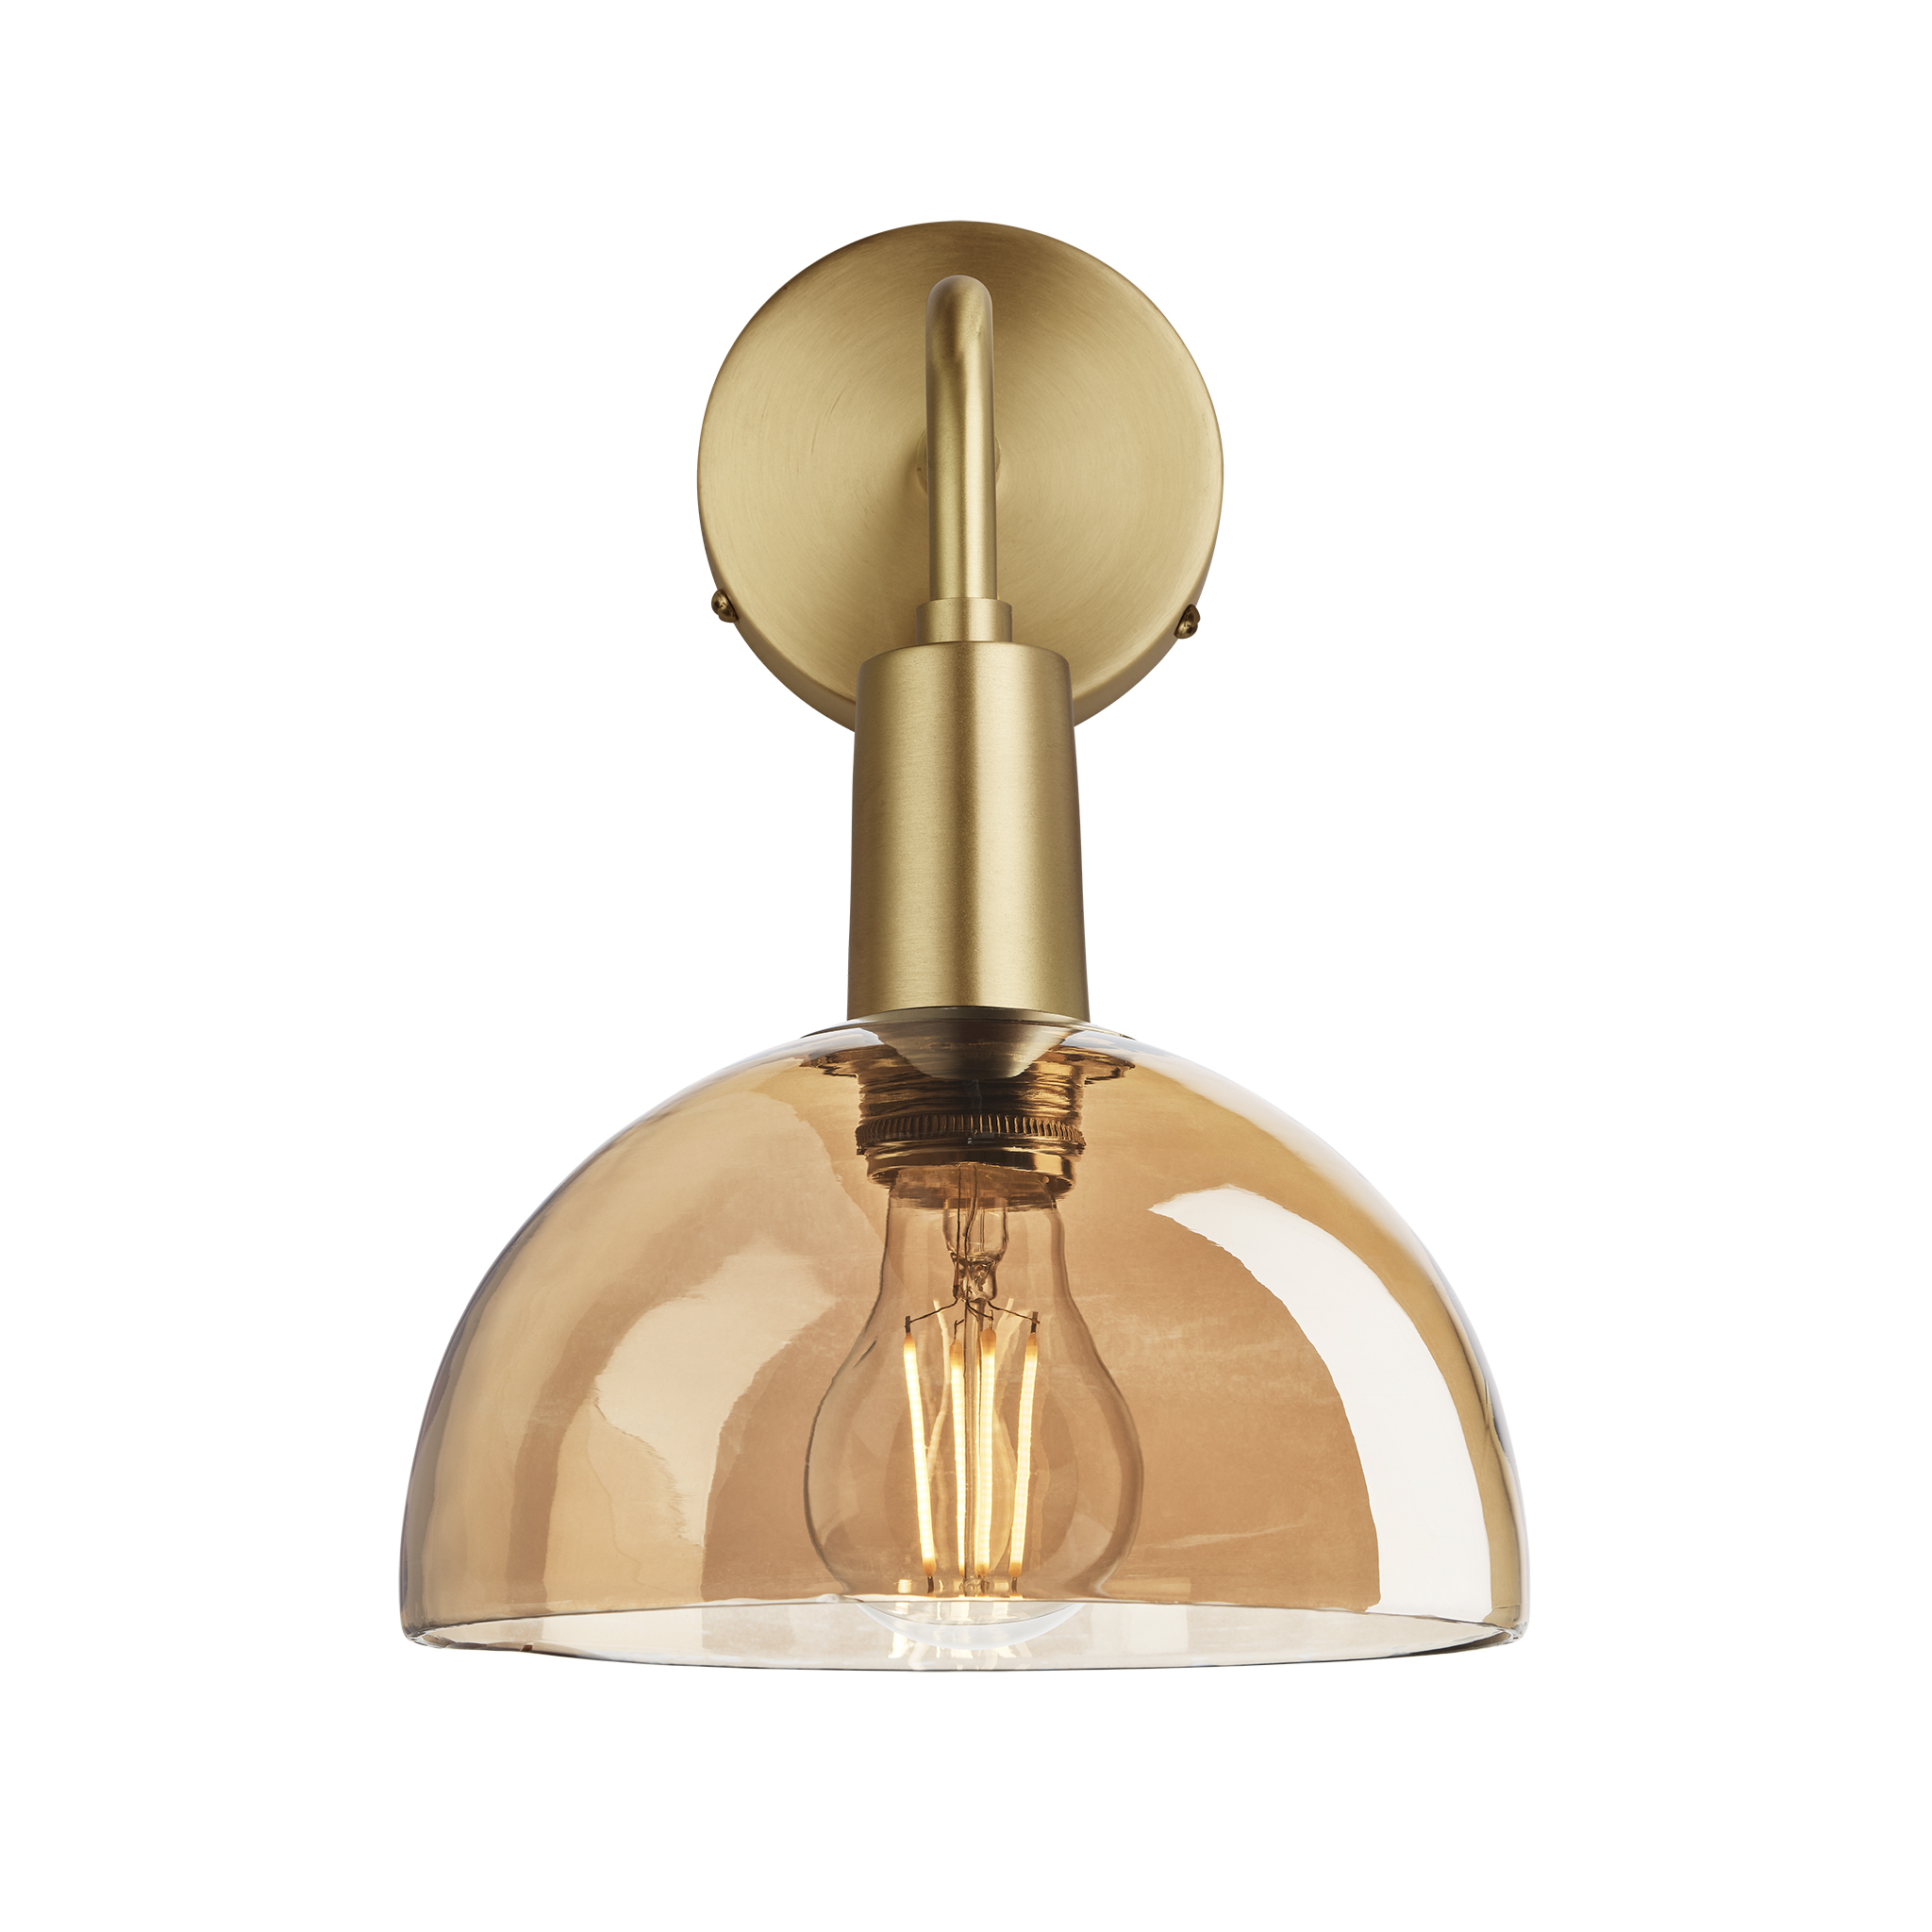 Brooklyn Tinted Glass Dome Wall Light - 8 Inch - Amber - Brass Holder